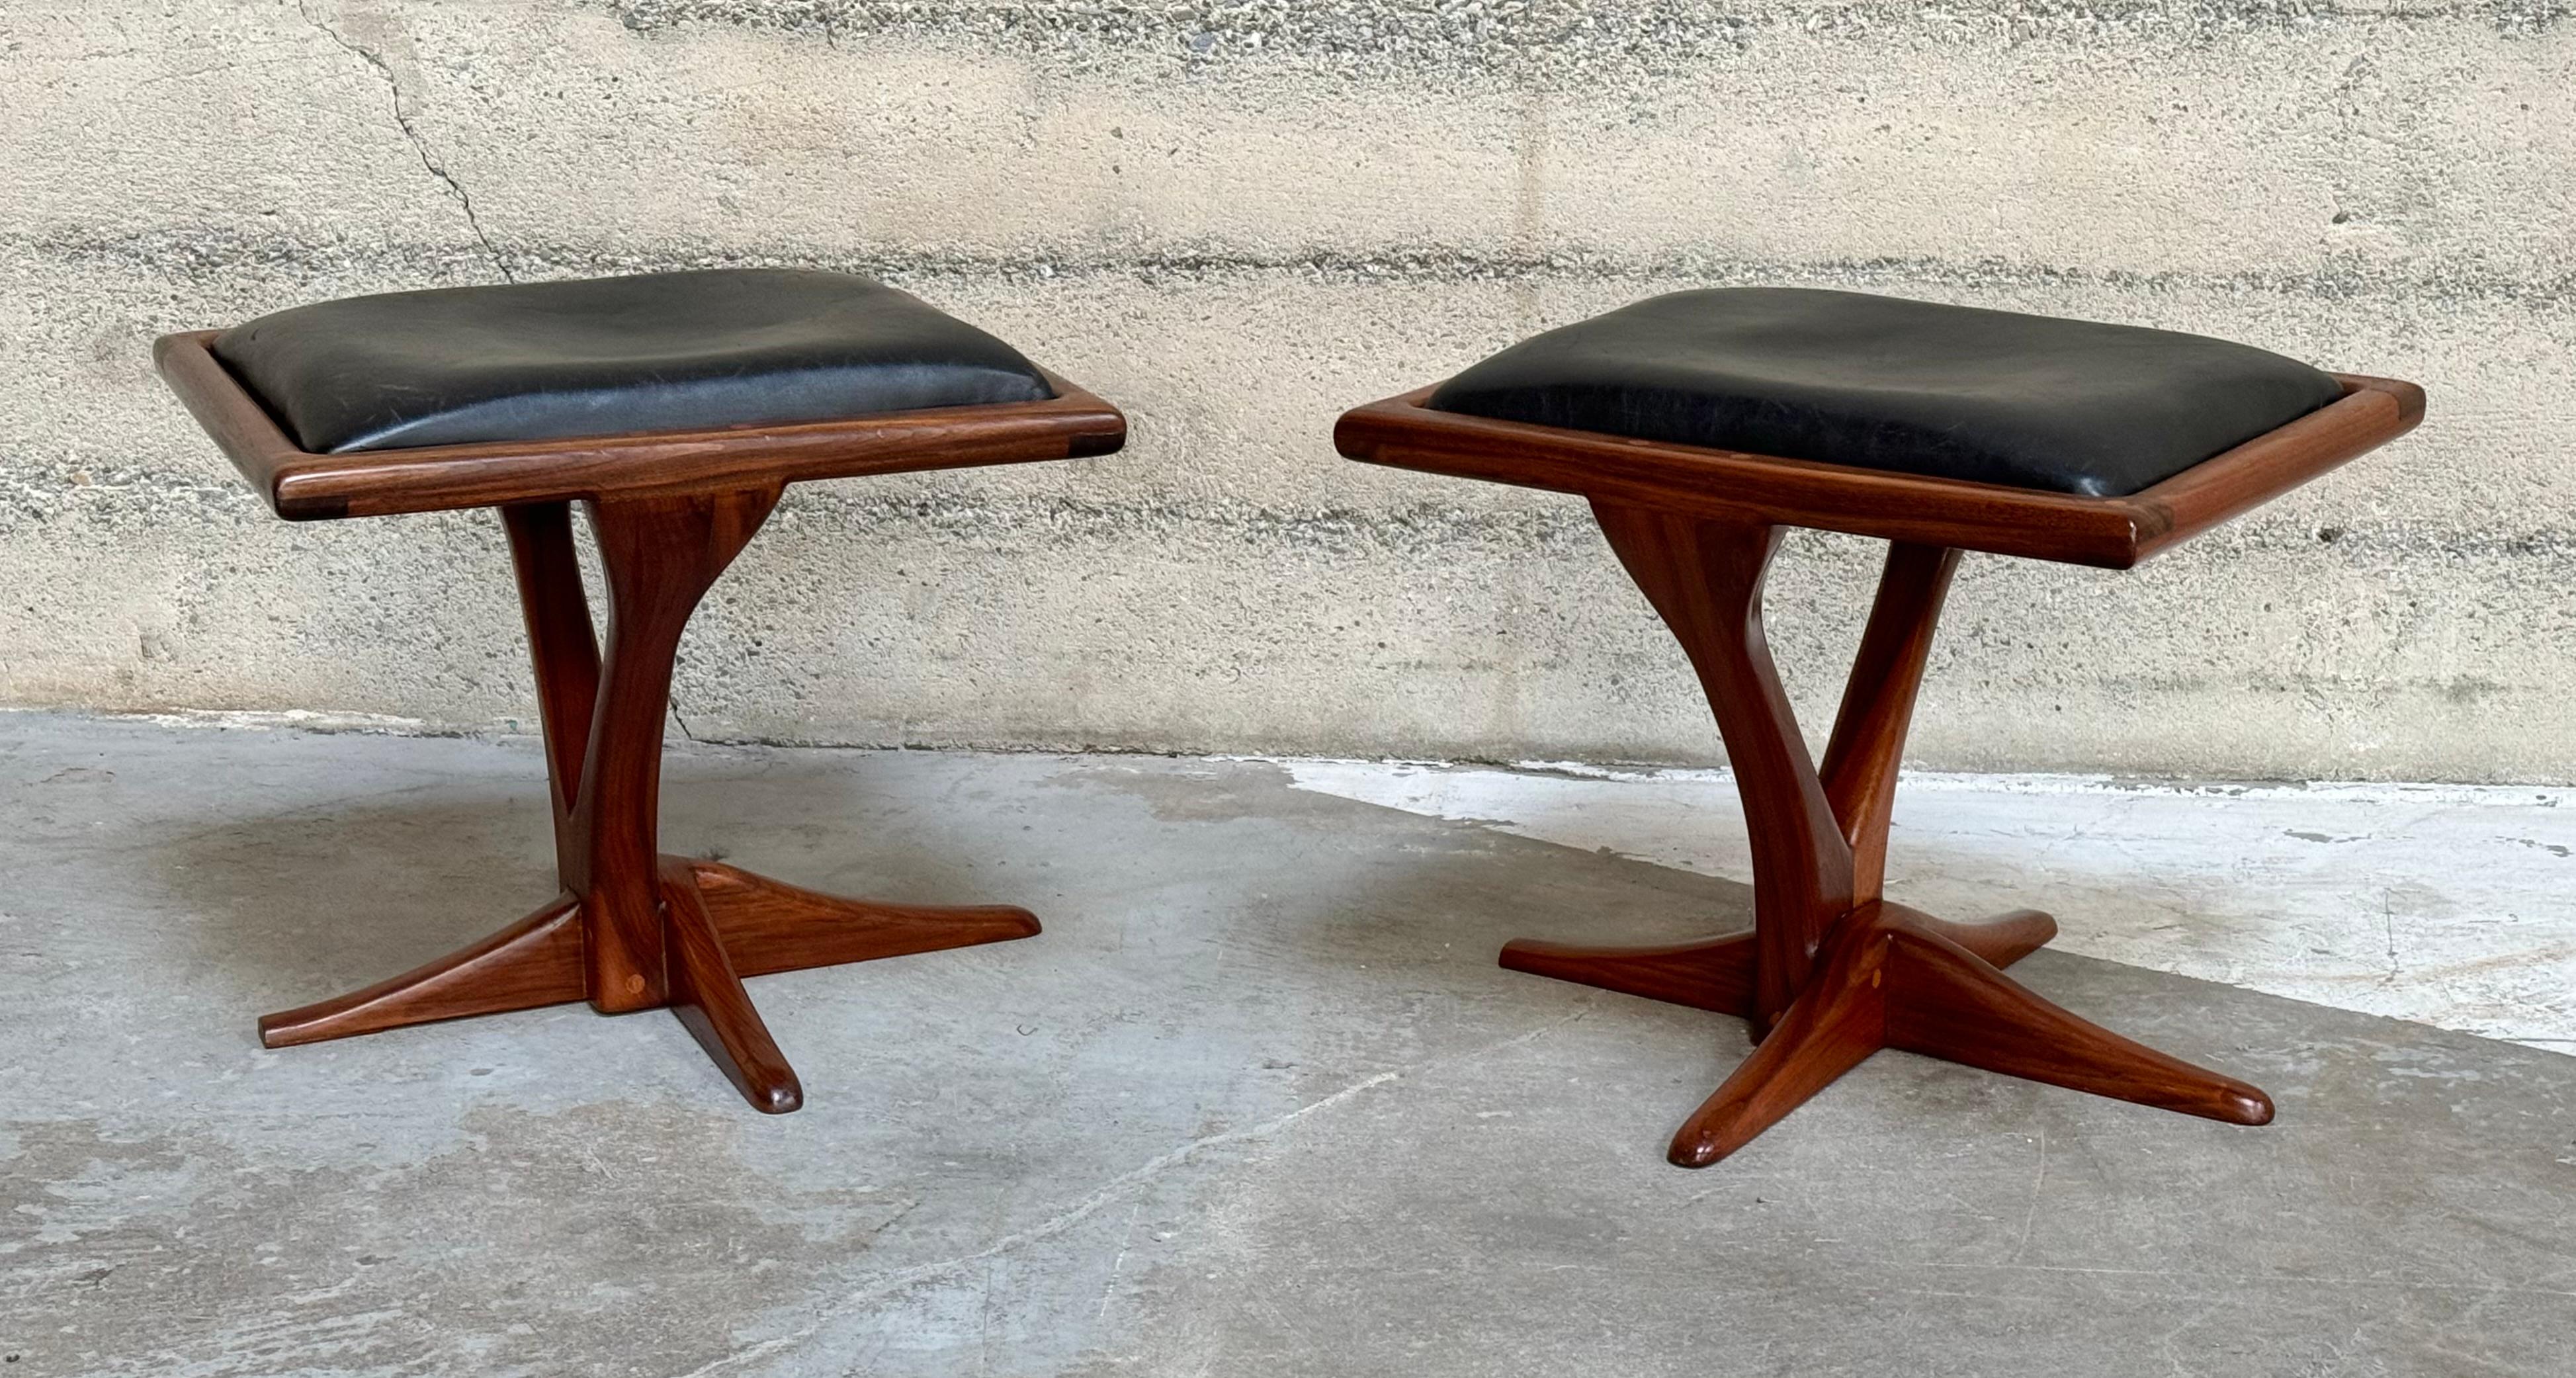 1970s walnut and leather studio wood stools with a V shaped frame with flowing down to a four legged asymmetrical base. The influences of the design can be found in nature with blends of both plant and marine life. Signed Guido 71.